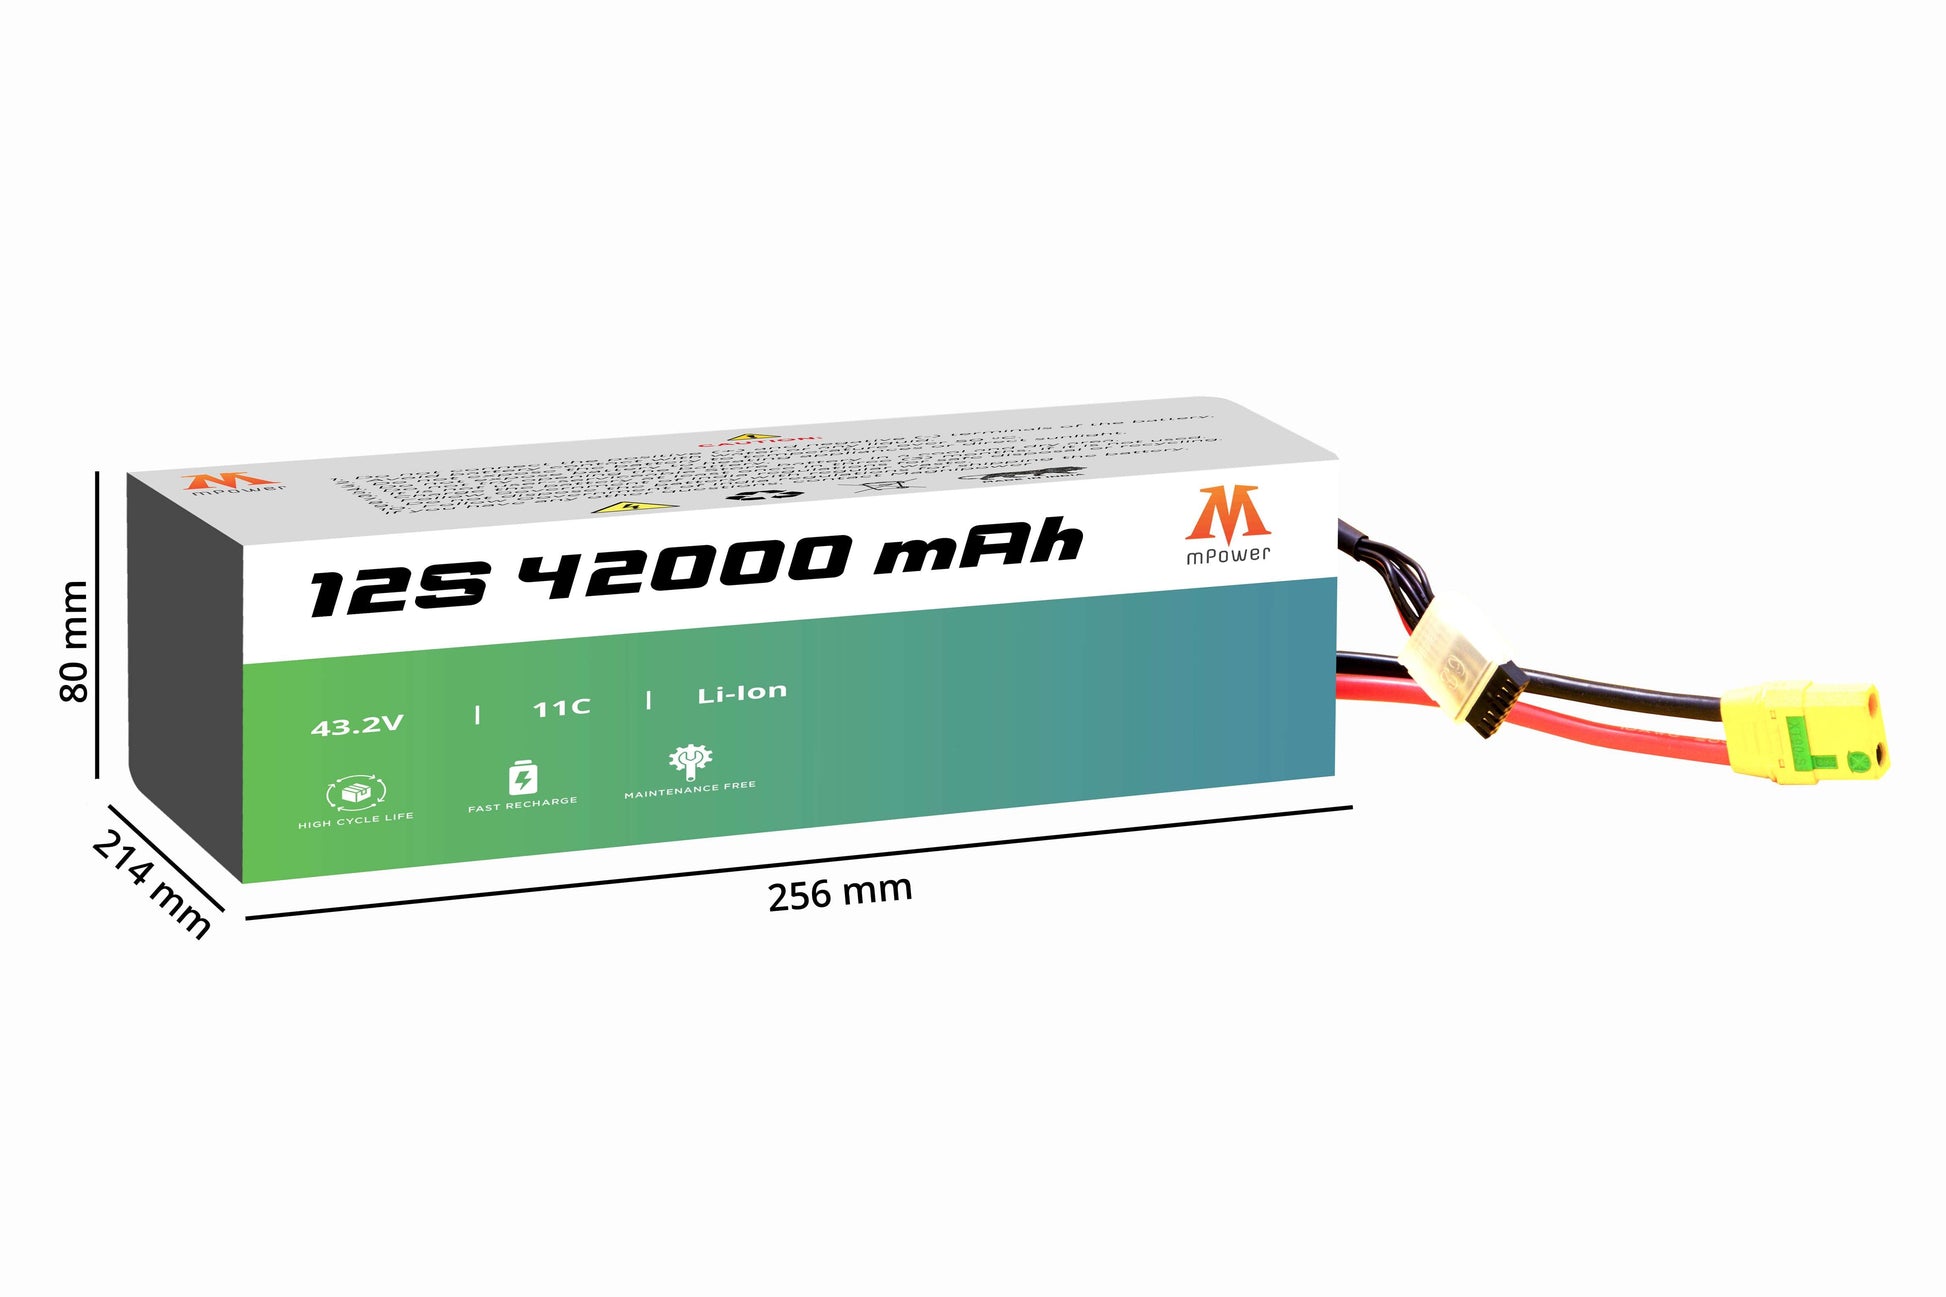 mPower 12S 42000mAh Lithium-Ion Battery for Delivery Drones-mpowerlithium